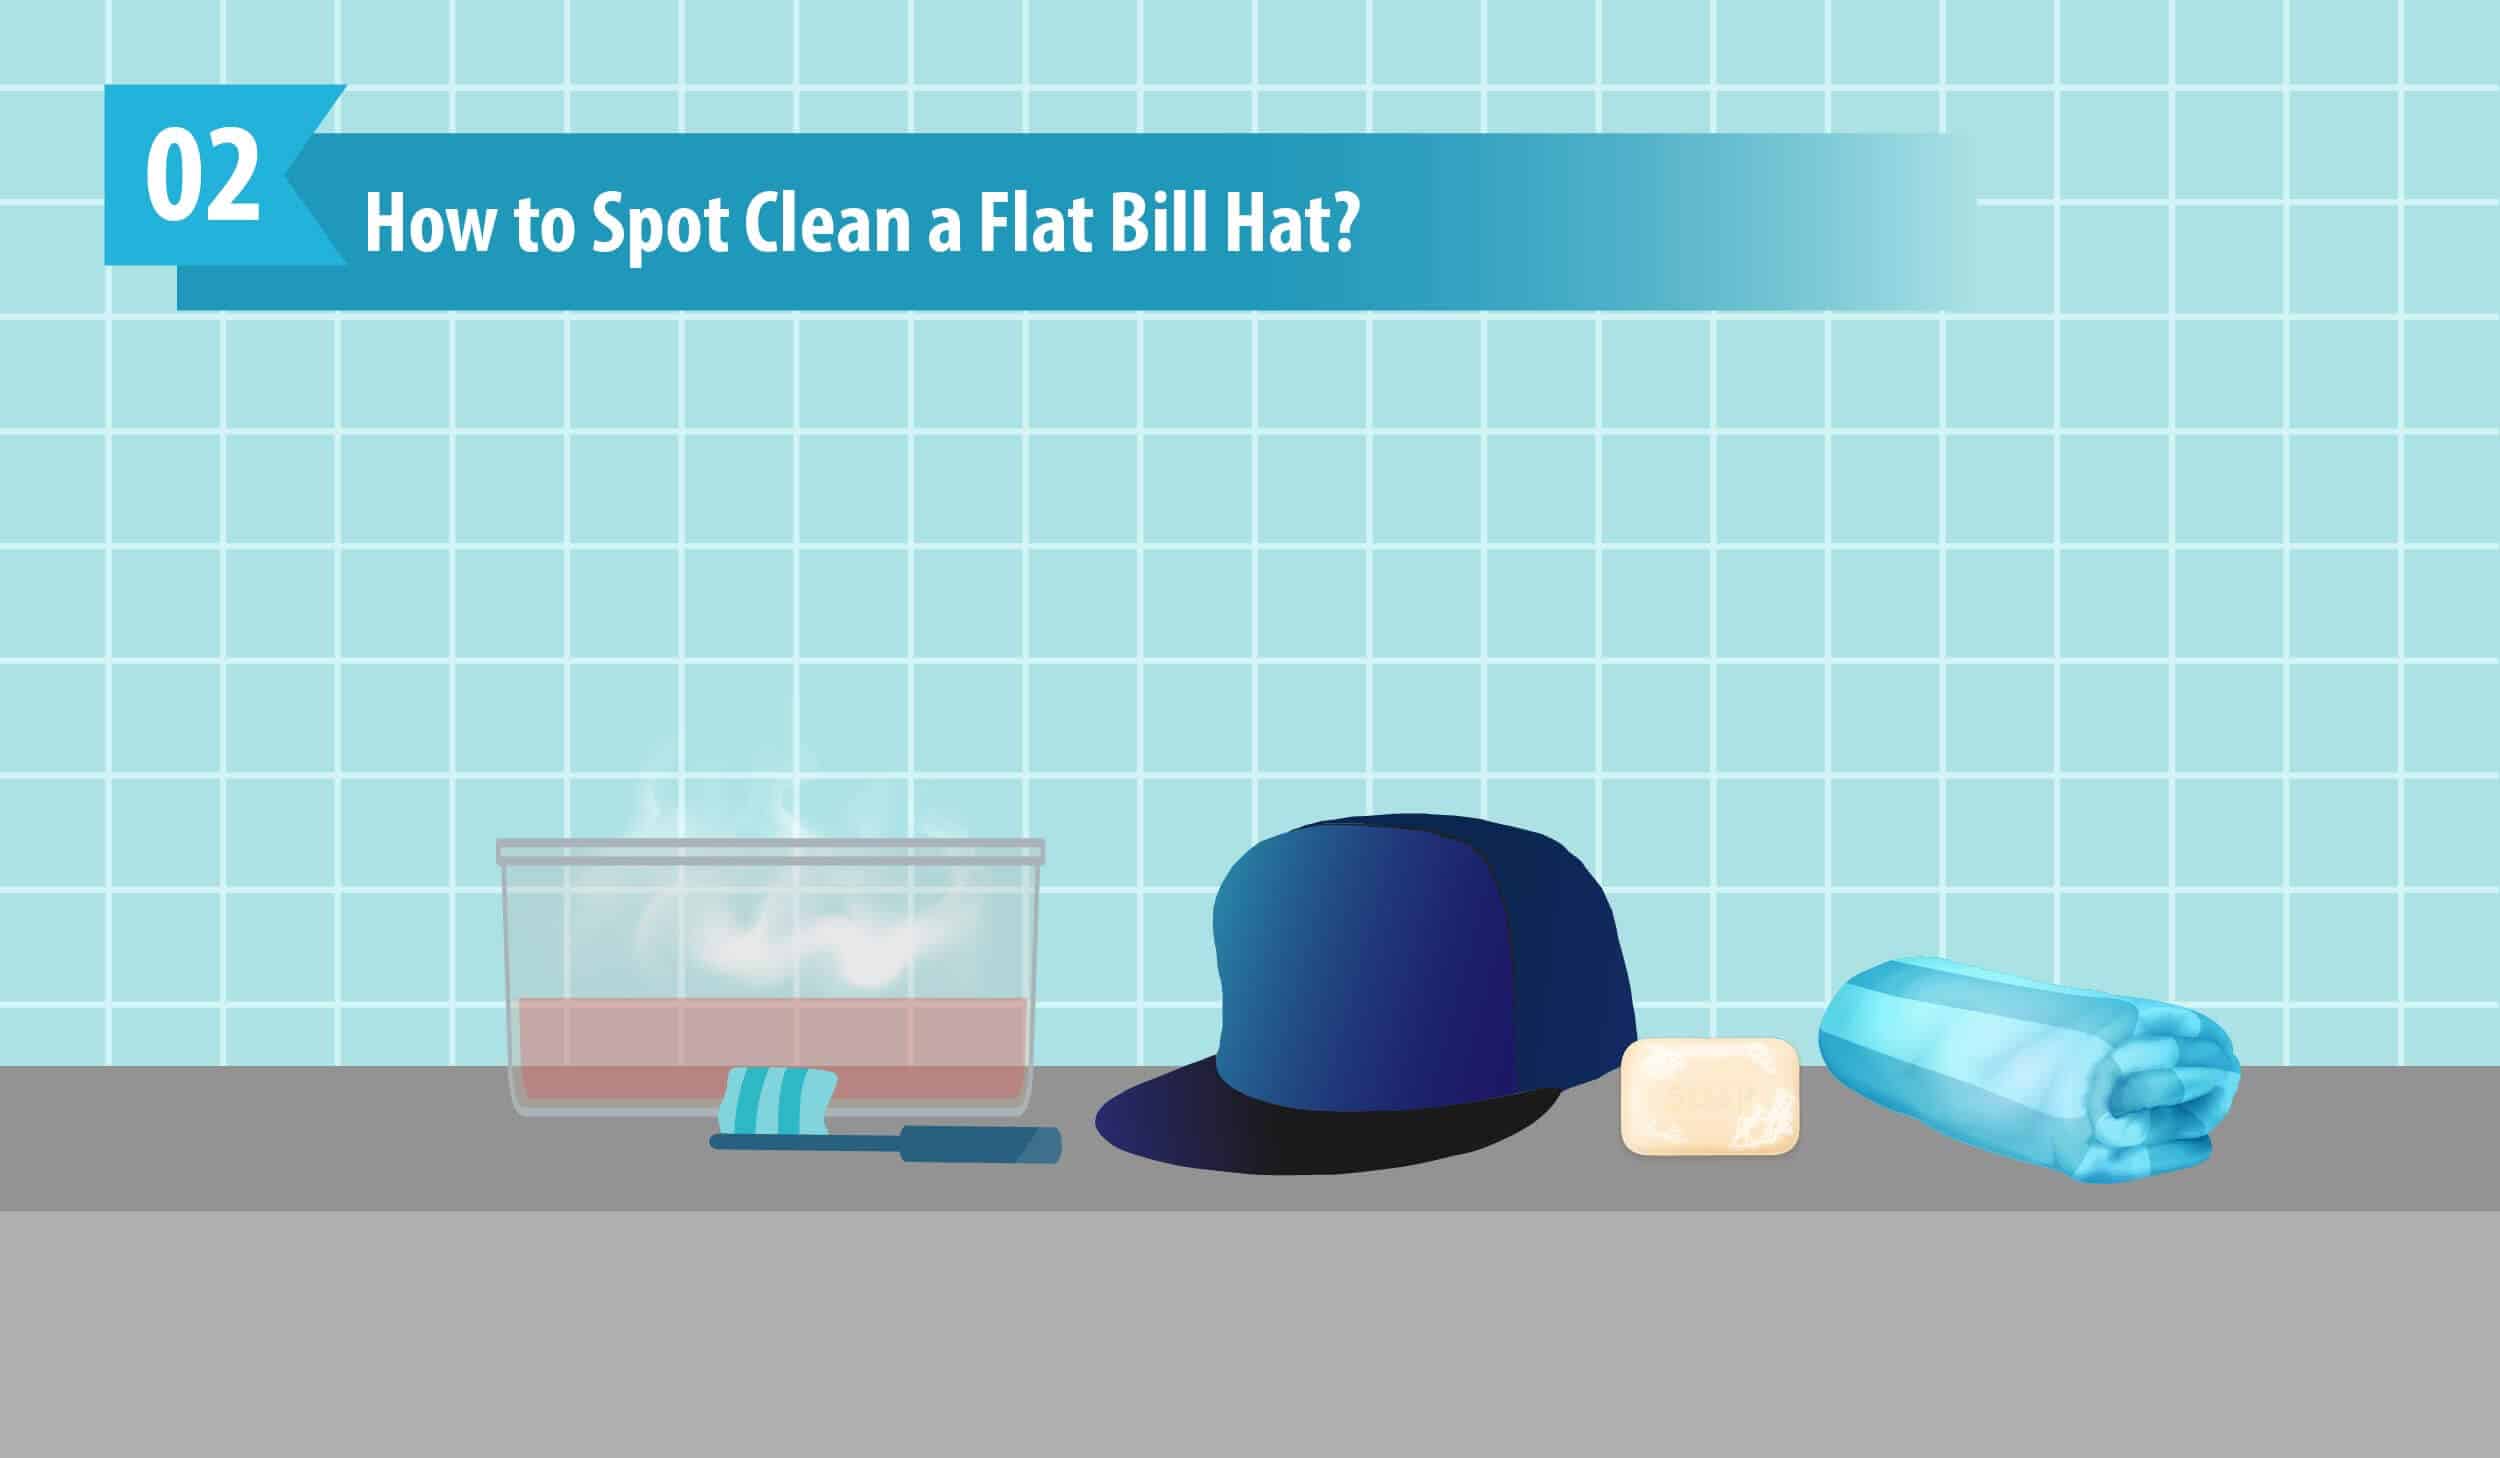 How to Spot Clean a Flat Bill Hat